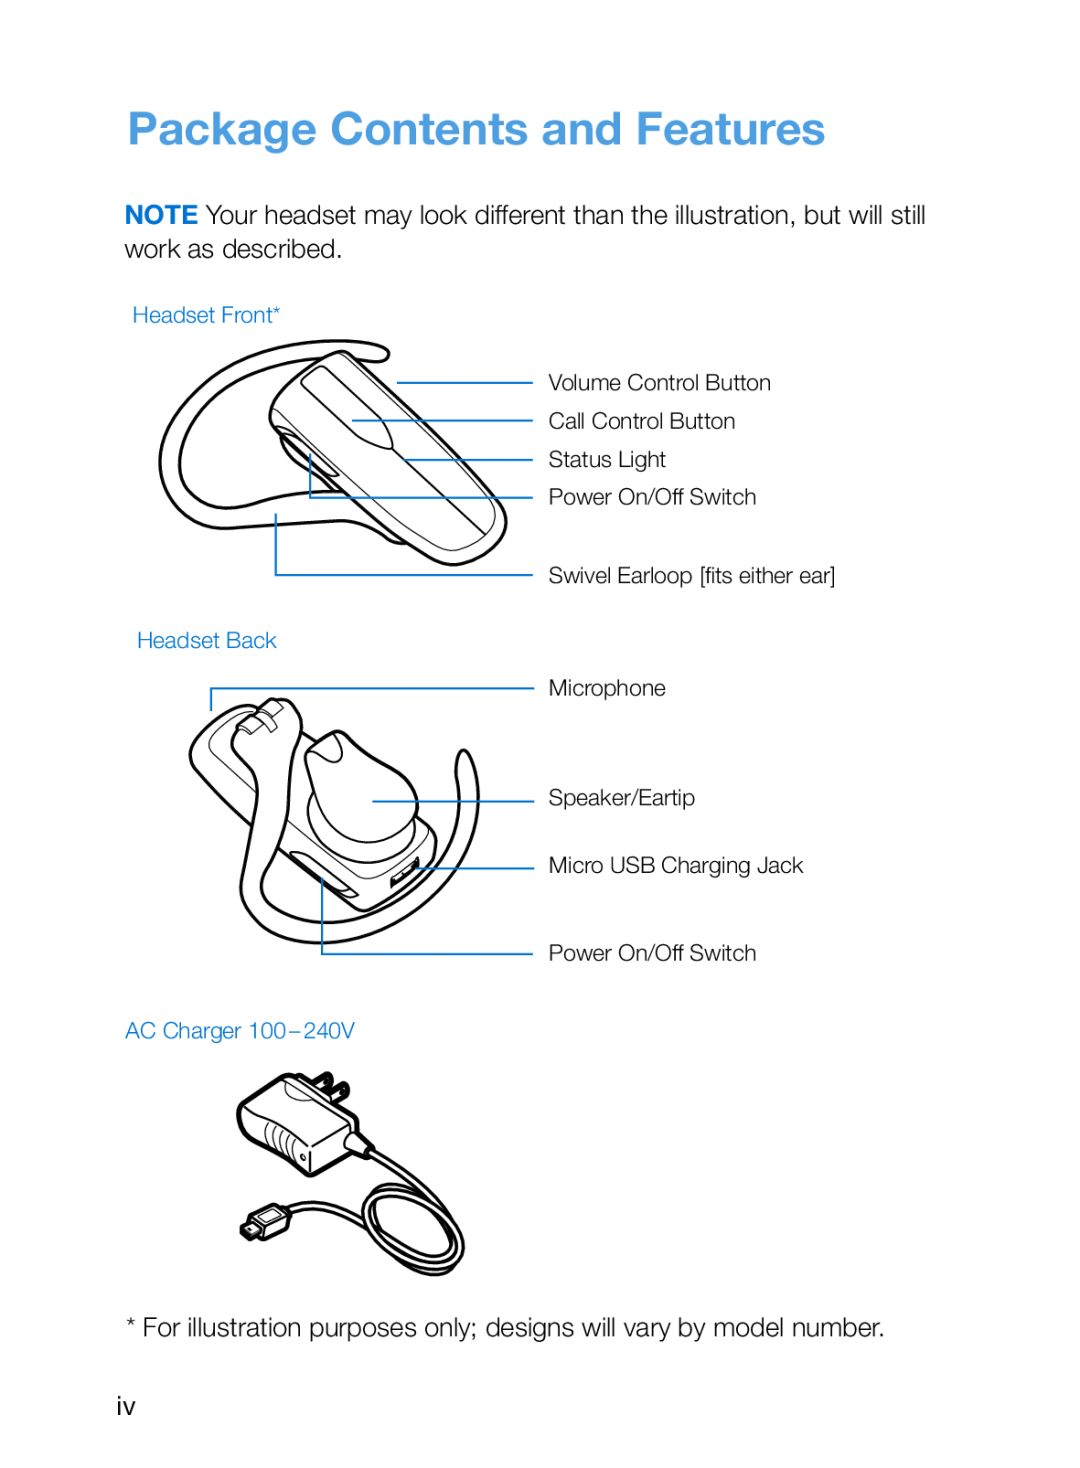 Plantronics 395, 245 Package Contents and Features, For illustration purposes only designs will vary by model number iv 